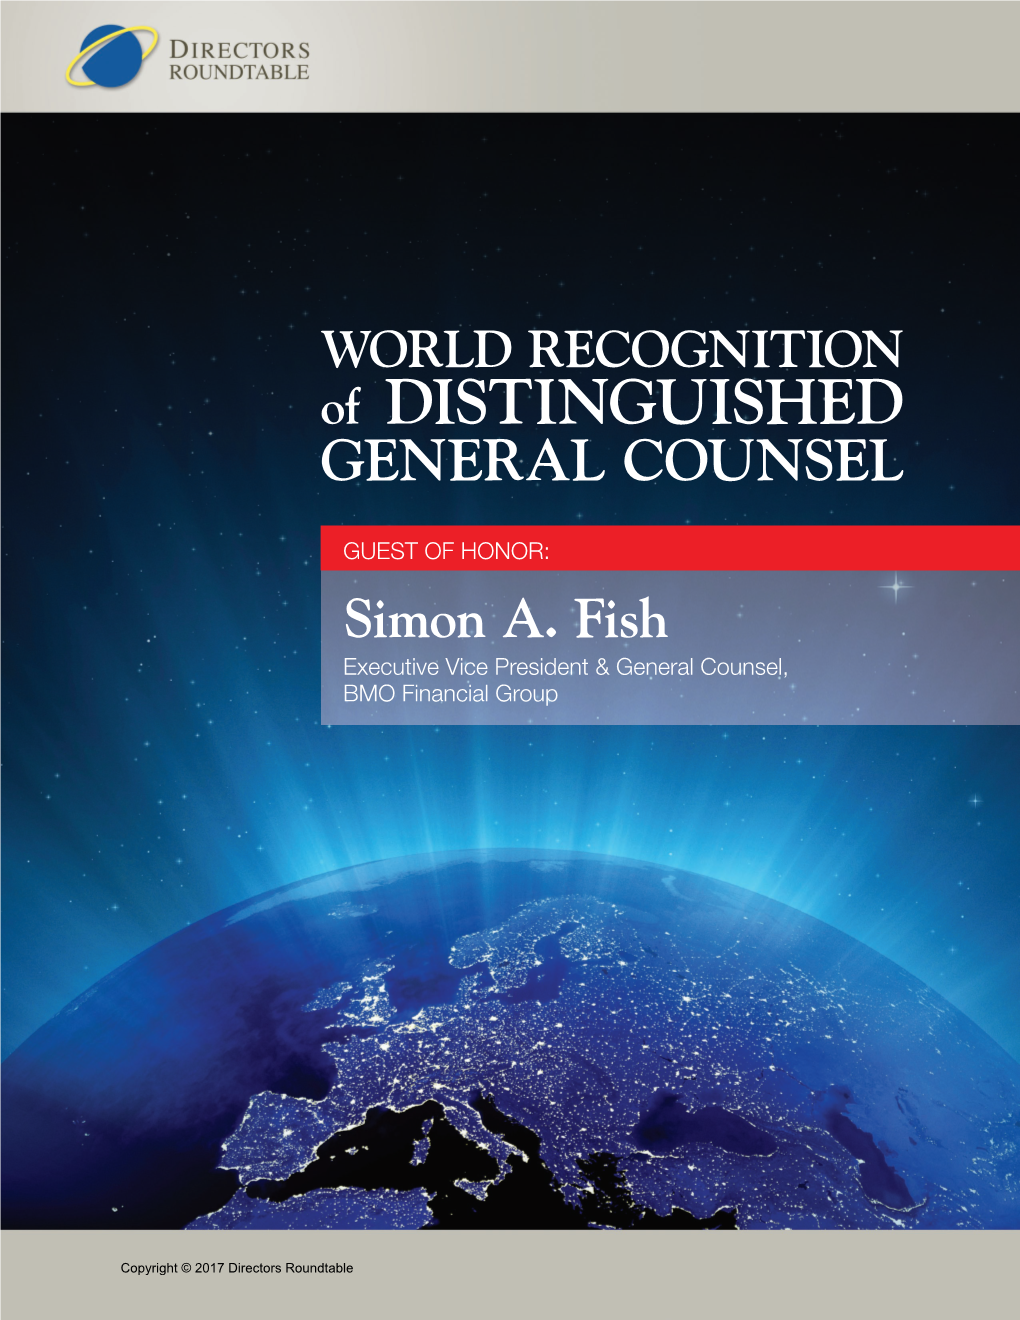 Simon Fish and the Legal Group of Bank of Montreal with the Leading Global Honour for General Counsel and Law Departments